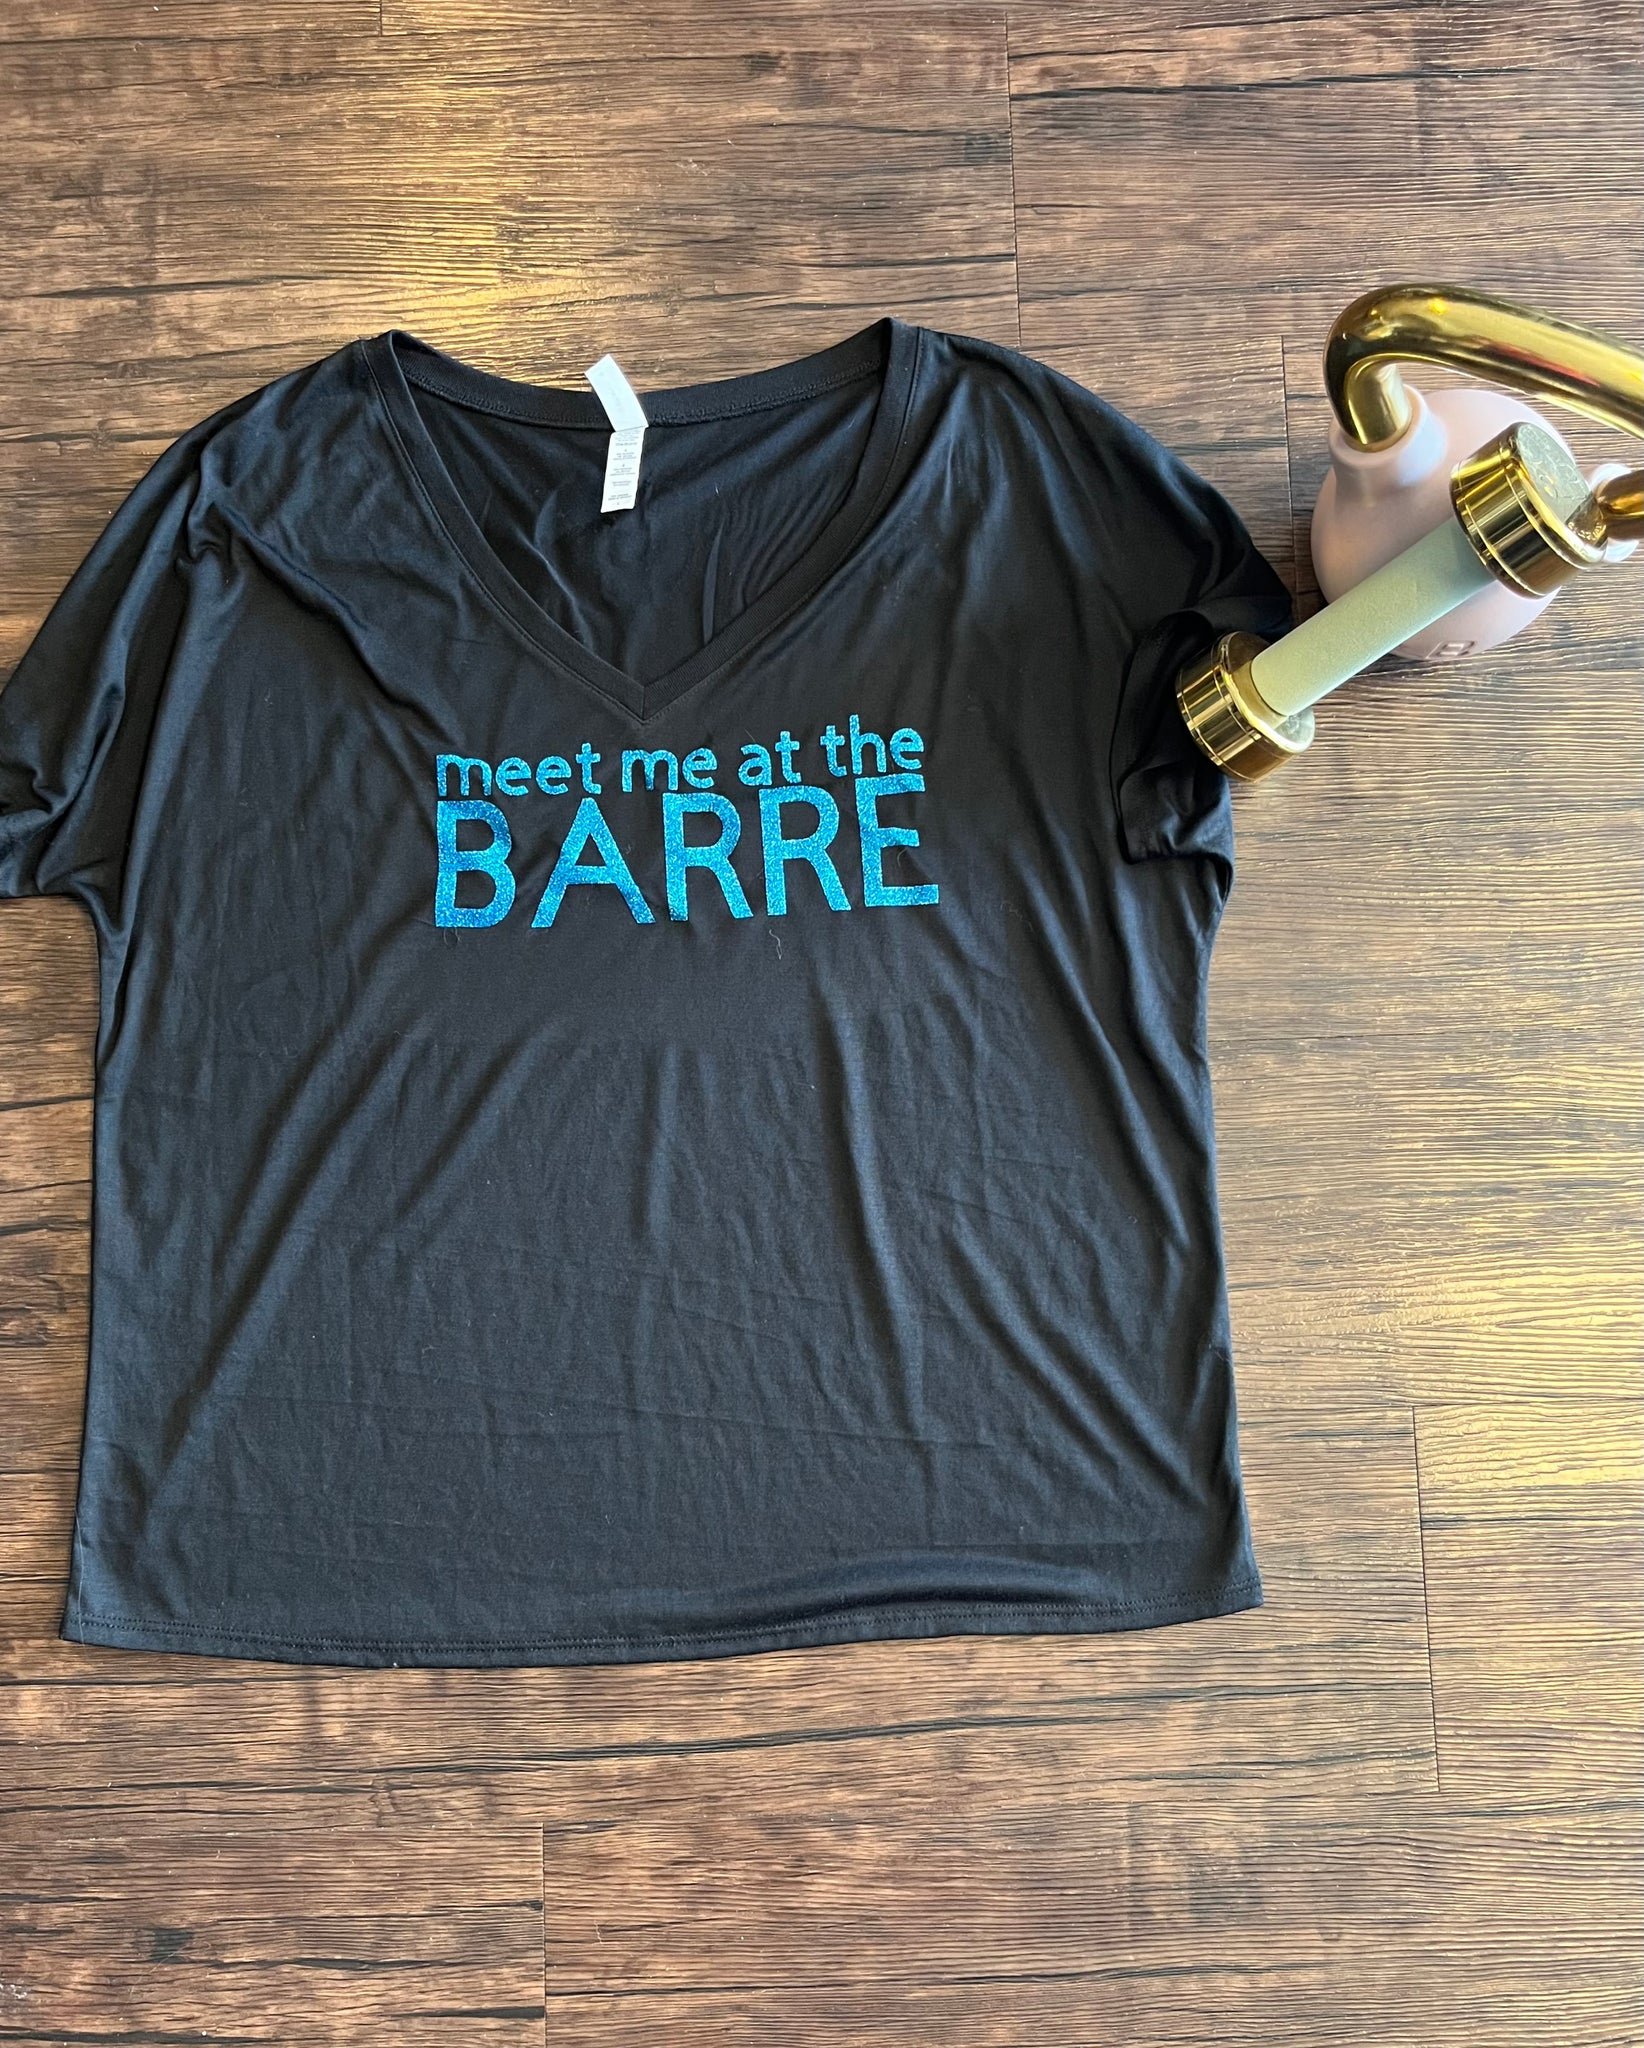 Meet Me at the Barre Tee